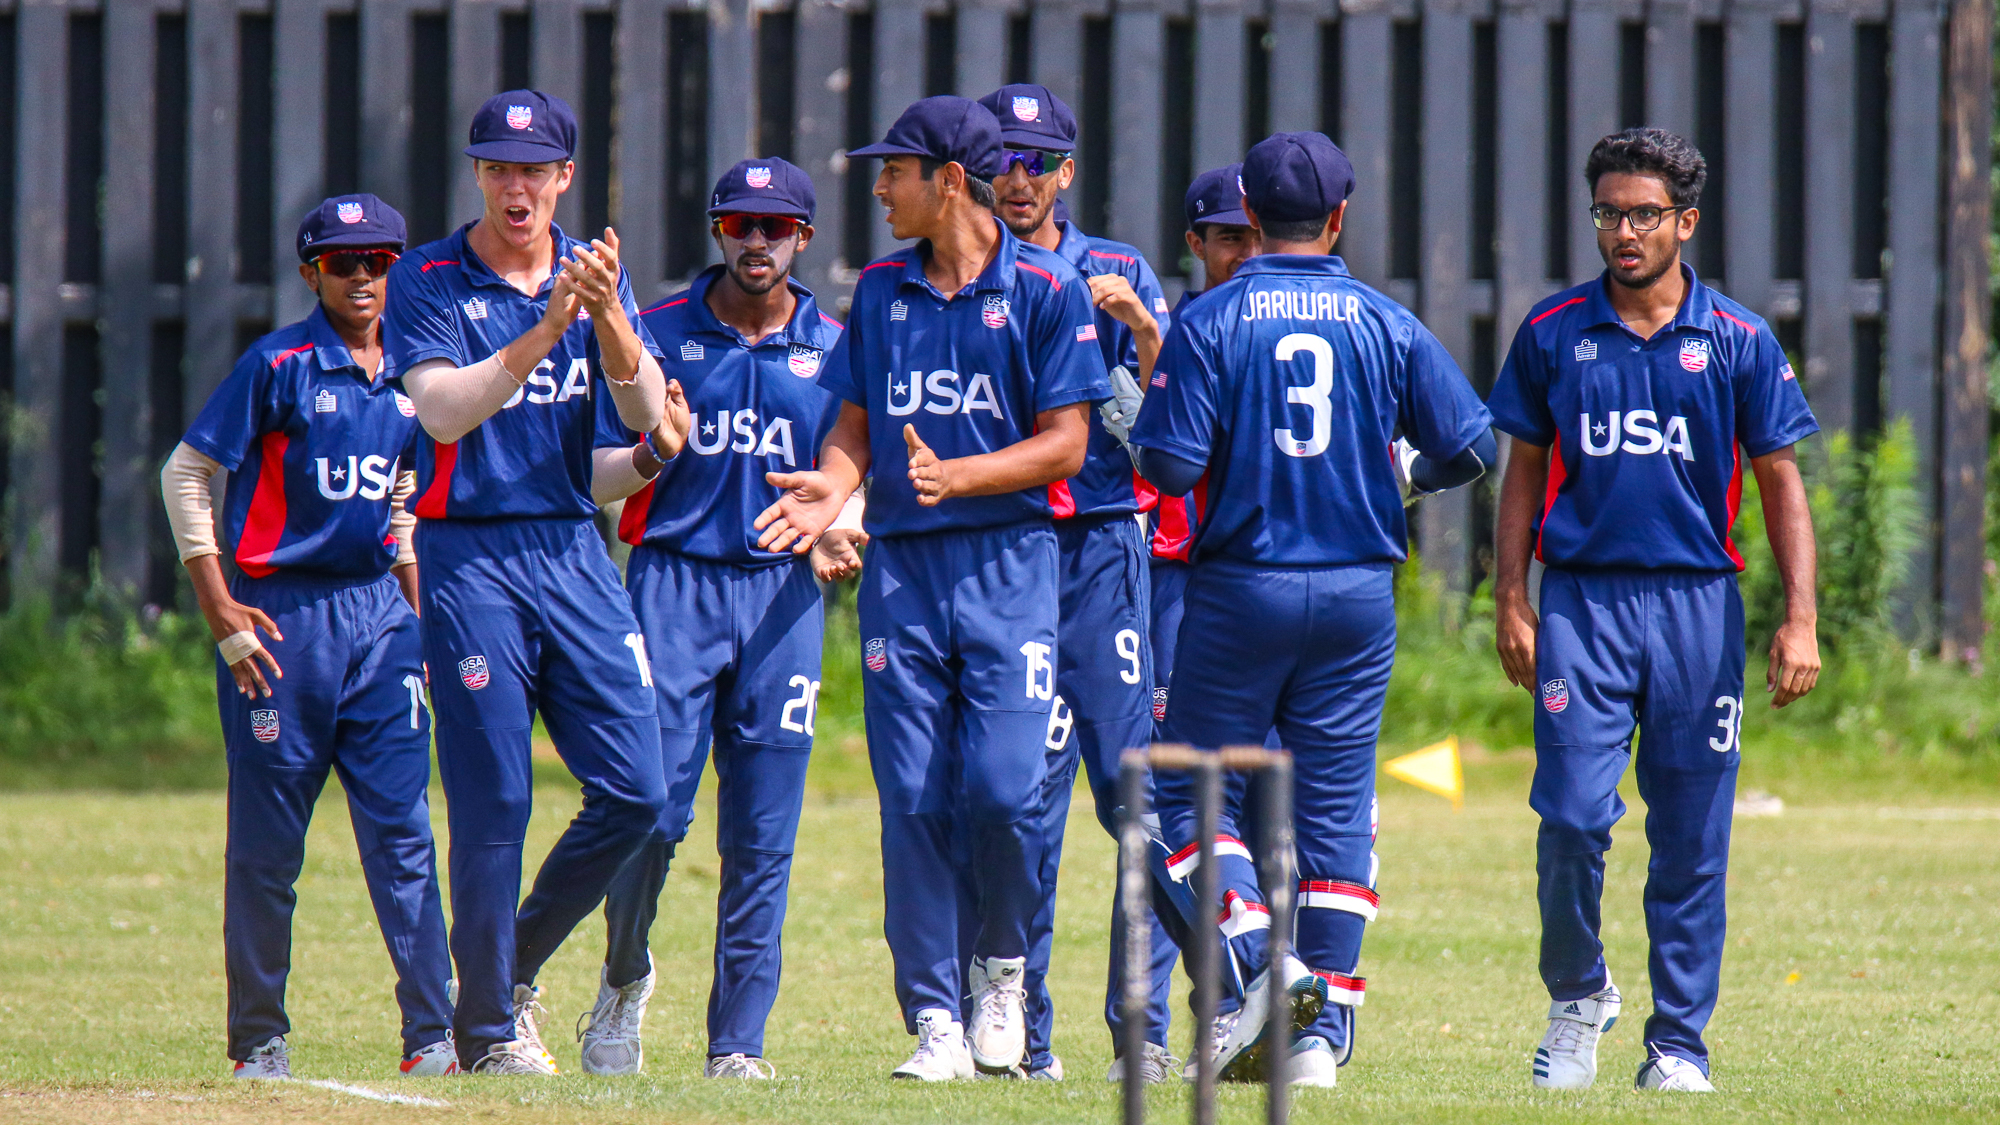 Under 19 World Cup pathway to start at Home for USA as ICC Announce Road to the ICC Under 19 Men’s Cricket World Cup 2022